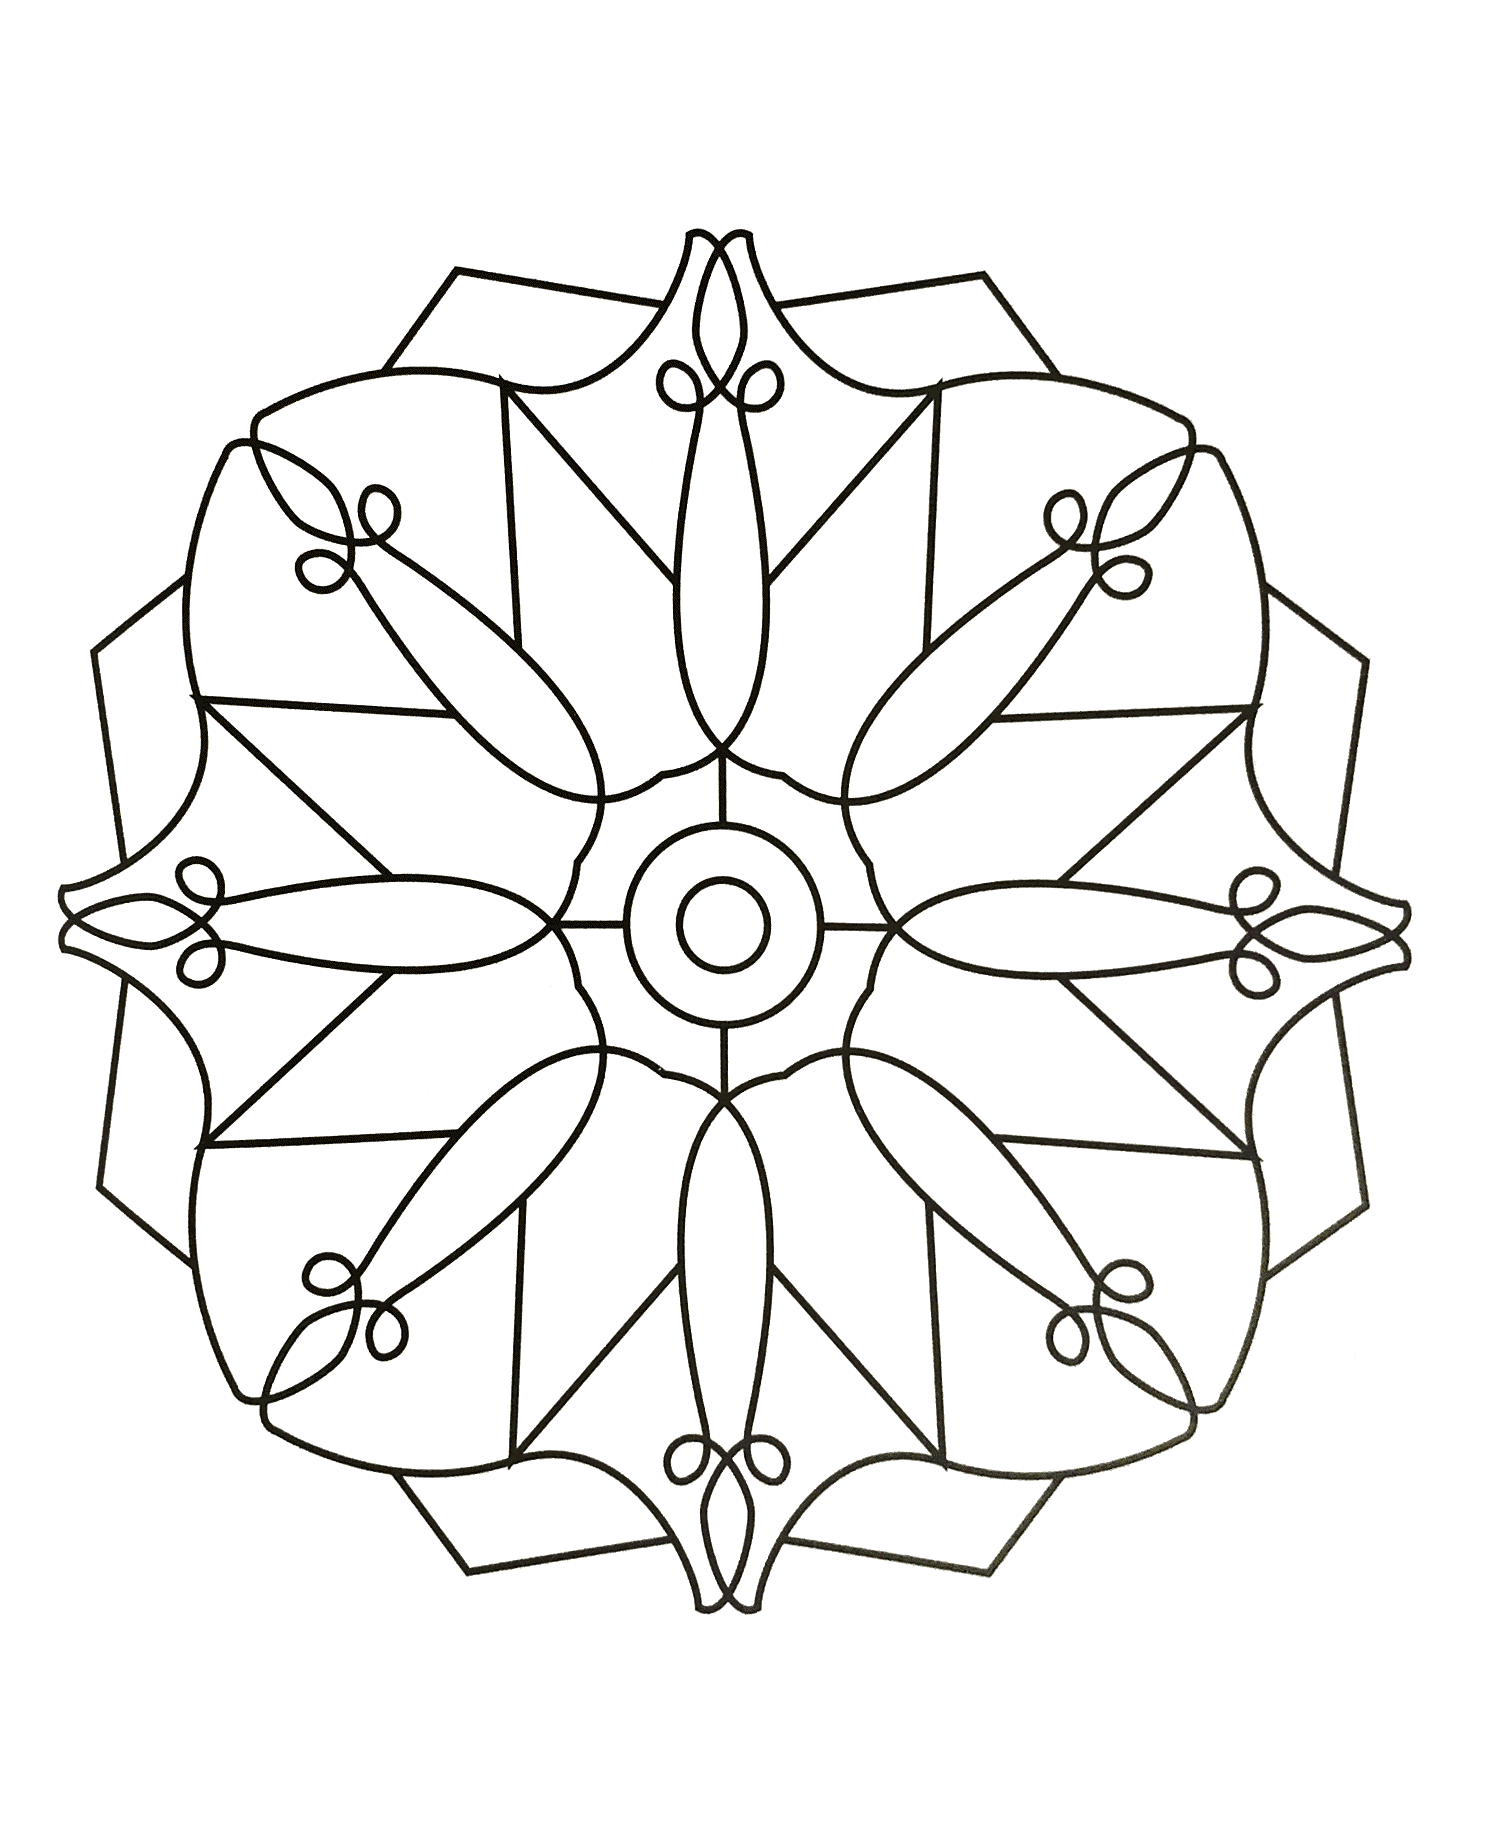 Mandala designs increase self-esteem and stimulate aesthetic sense. Discover it with this beautiful coloring page.